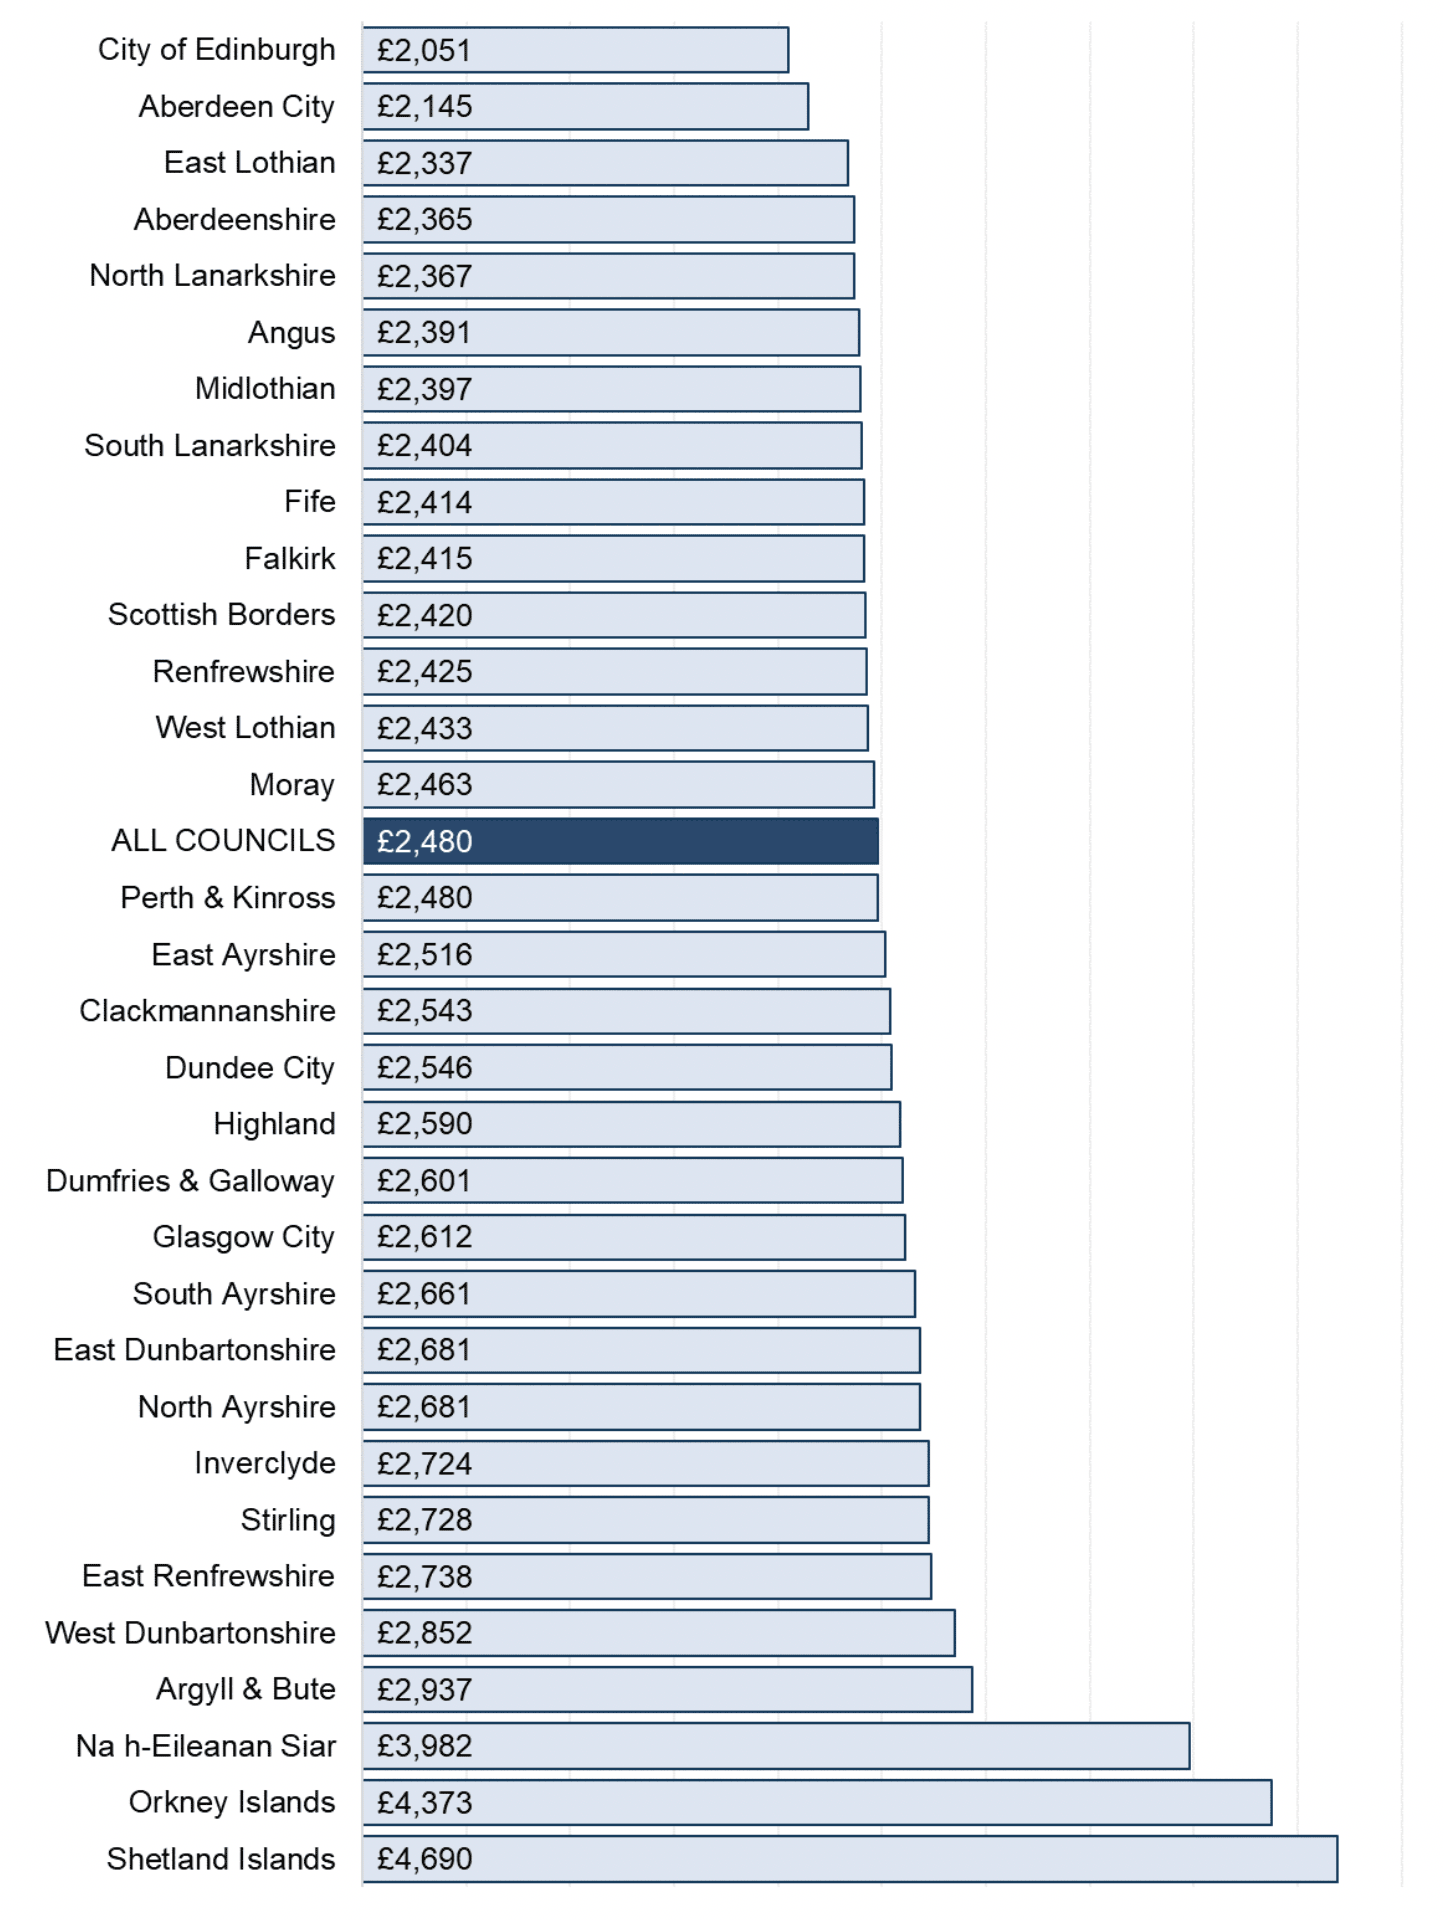 Bar chart showing net revenue expenditure on General Fund services per person by council. In 2022-23, councils spent on average £2,480 per person, an increase from £2,246 per person in 2021-22. Spend per person varied across councils with island authorities having the highest spend per person.